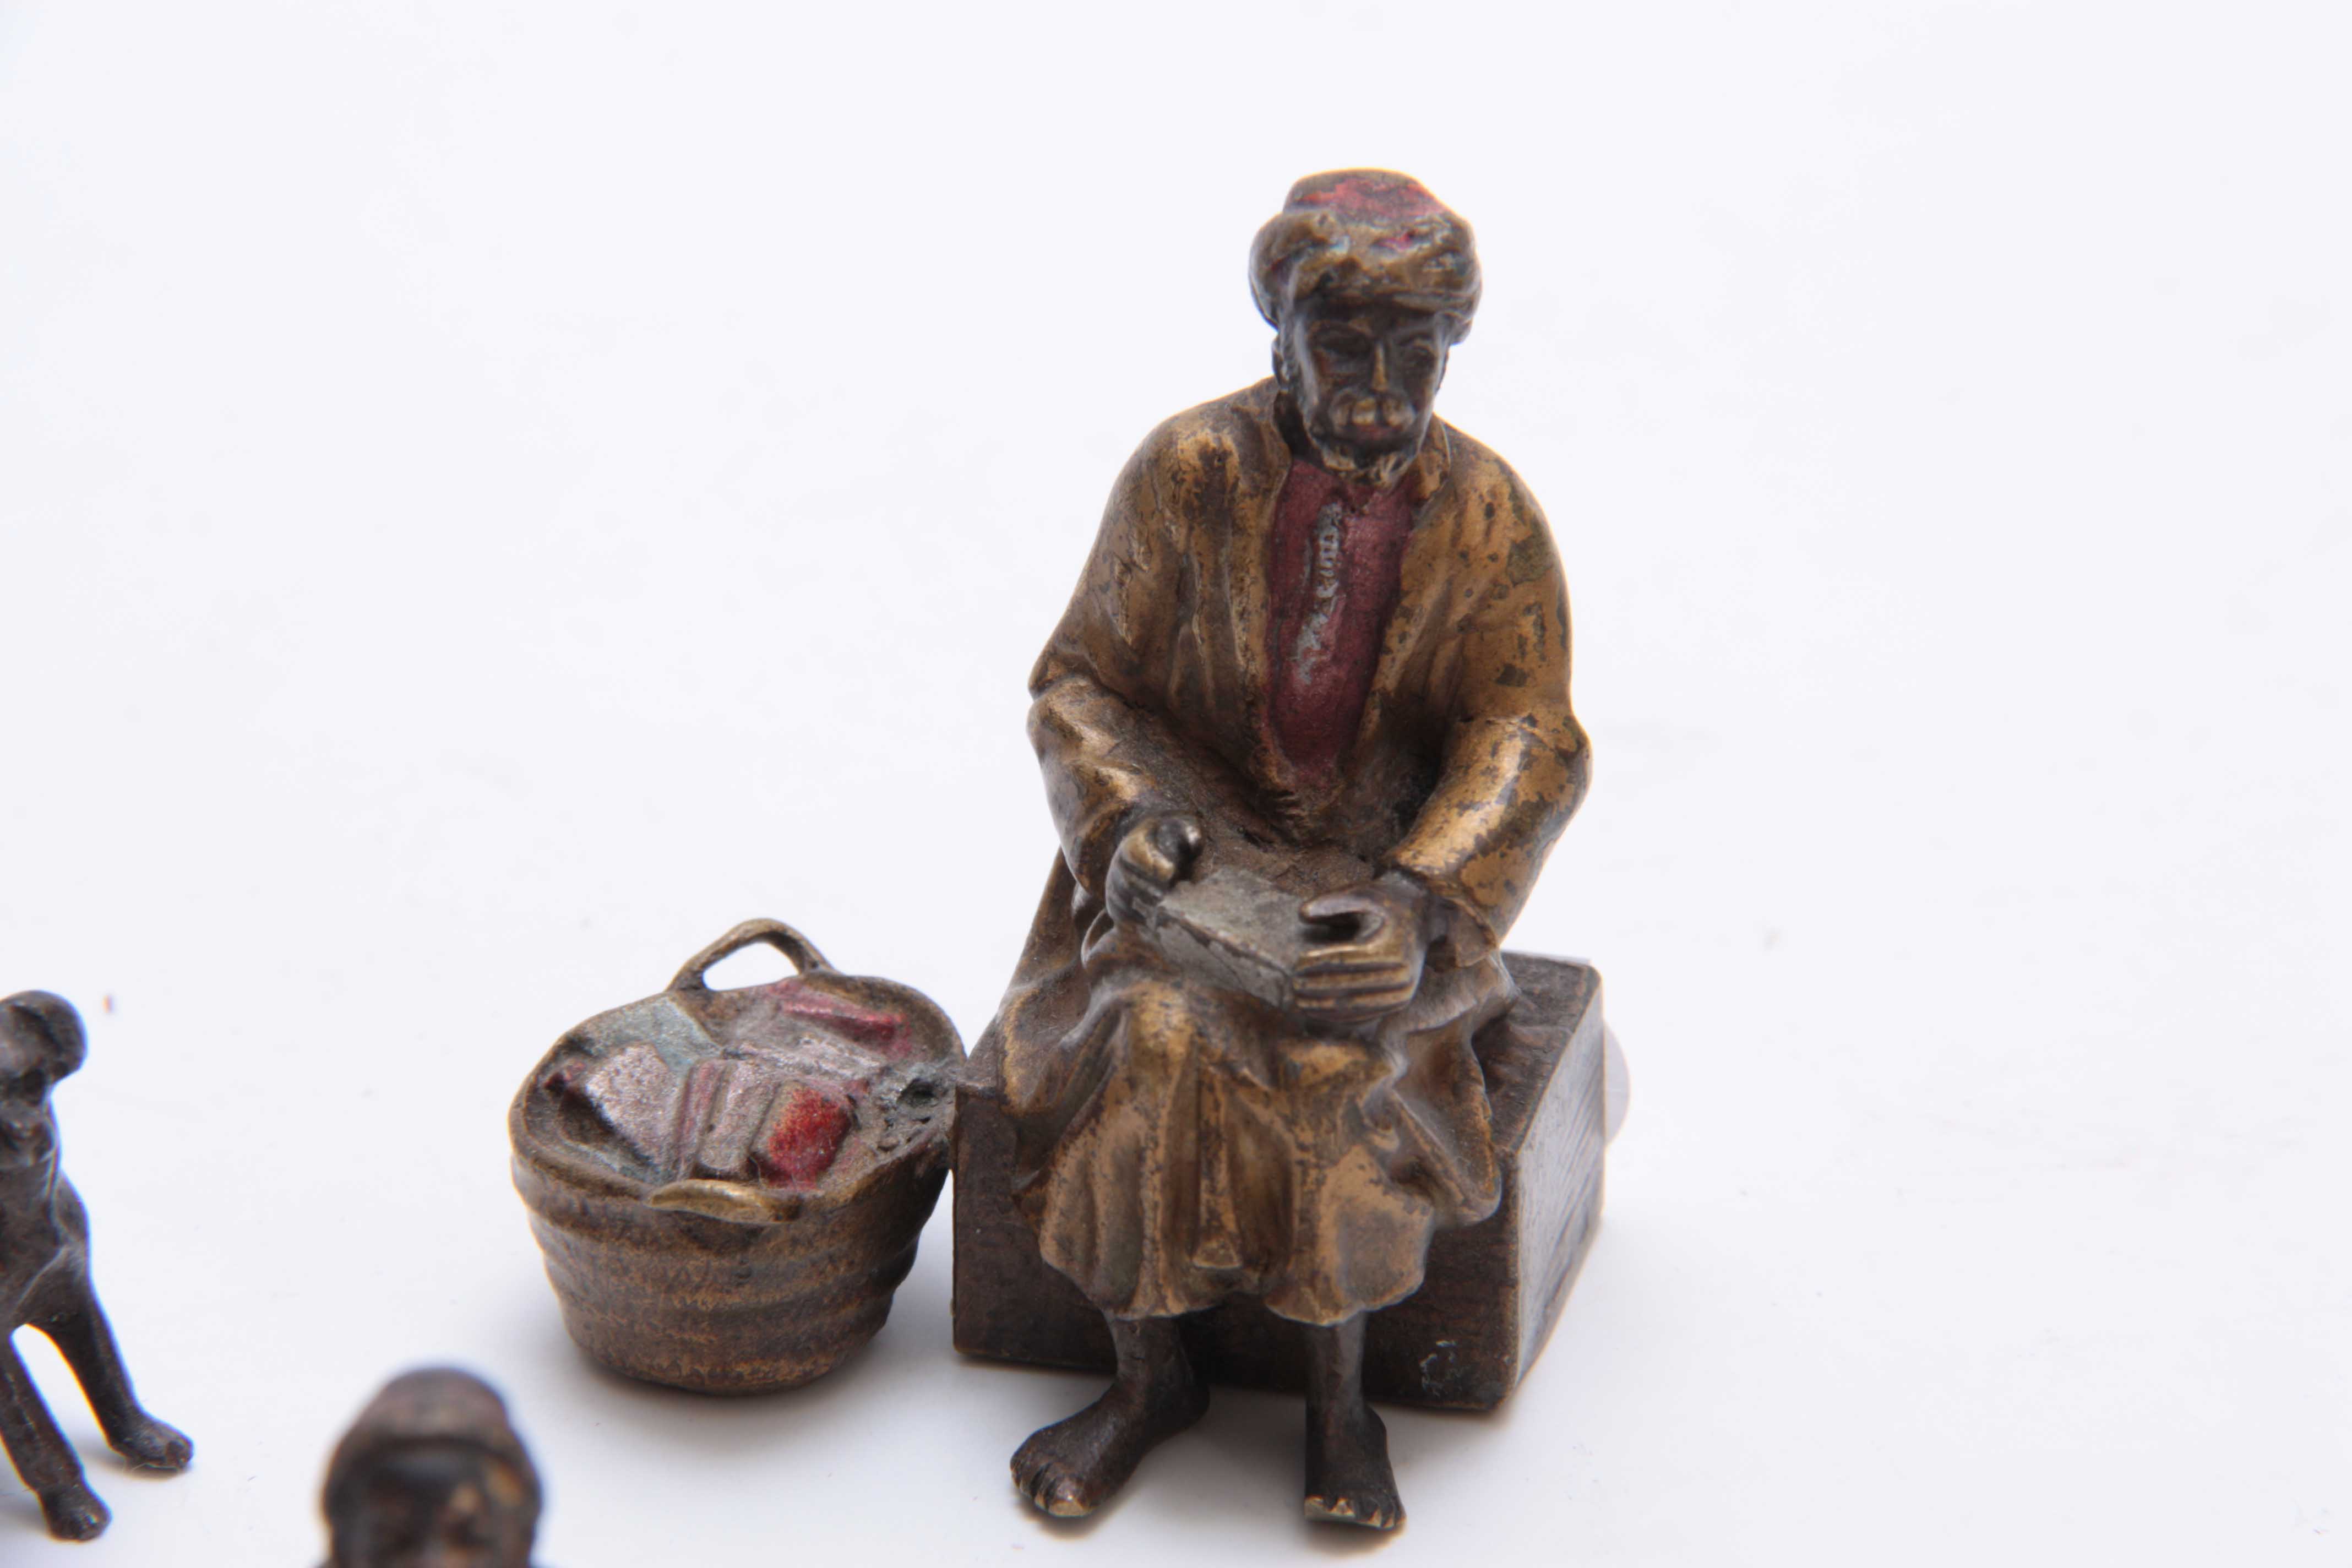 A COLLECTION OF THREE EARLY 20th CENTURY COLD PAINTED BRONZE FIGURES modelled as an Arab bookseller, - Image 2 of 5